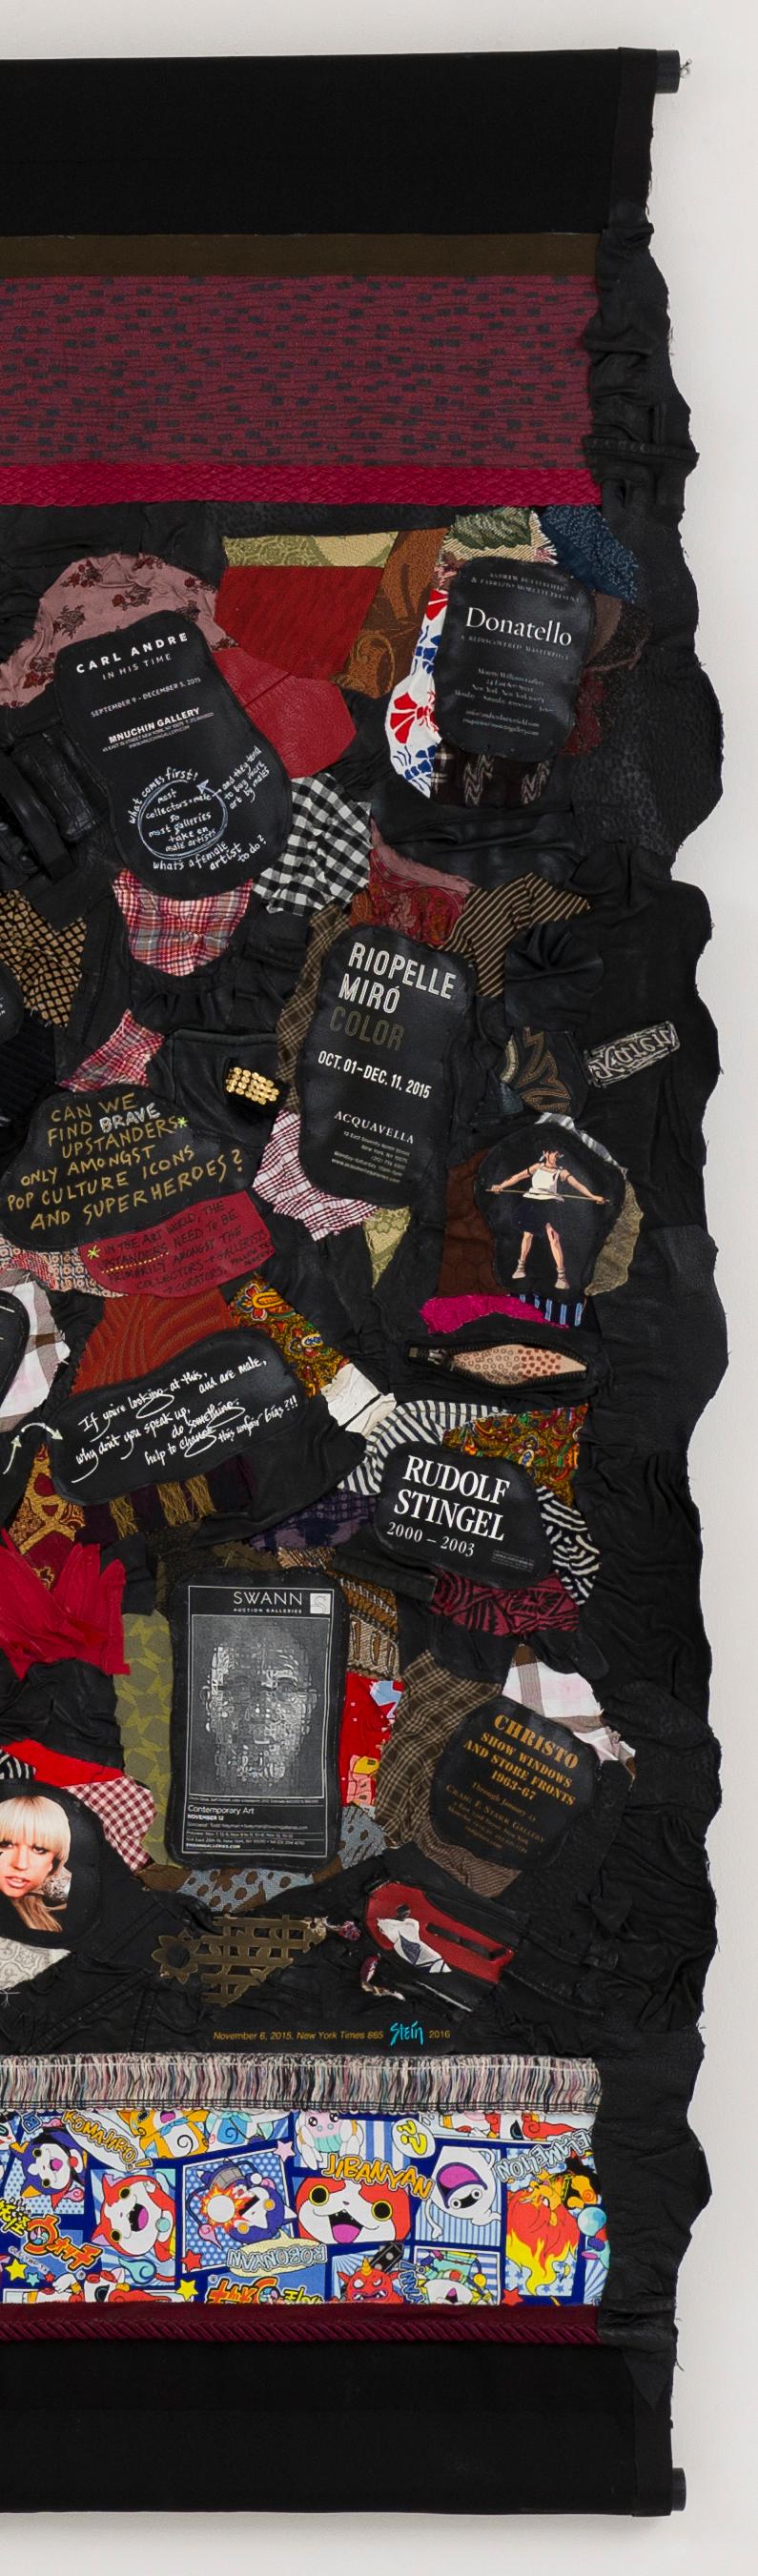 Linda Stein, November 6, 2015 New York Times 865 - Feminist Contemporary Fabric Leather Sculptural Tapestry 

November 6, 2015 New York Times 865 is from Linda Stein's Sexism series, which advocates an expanded perspective of gender